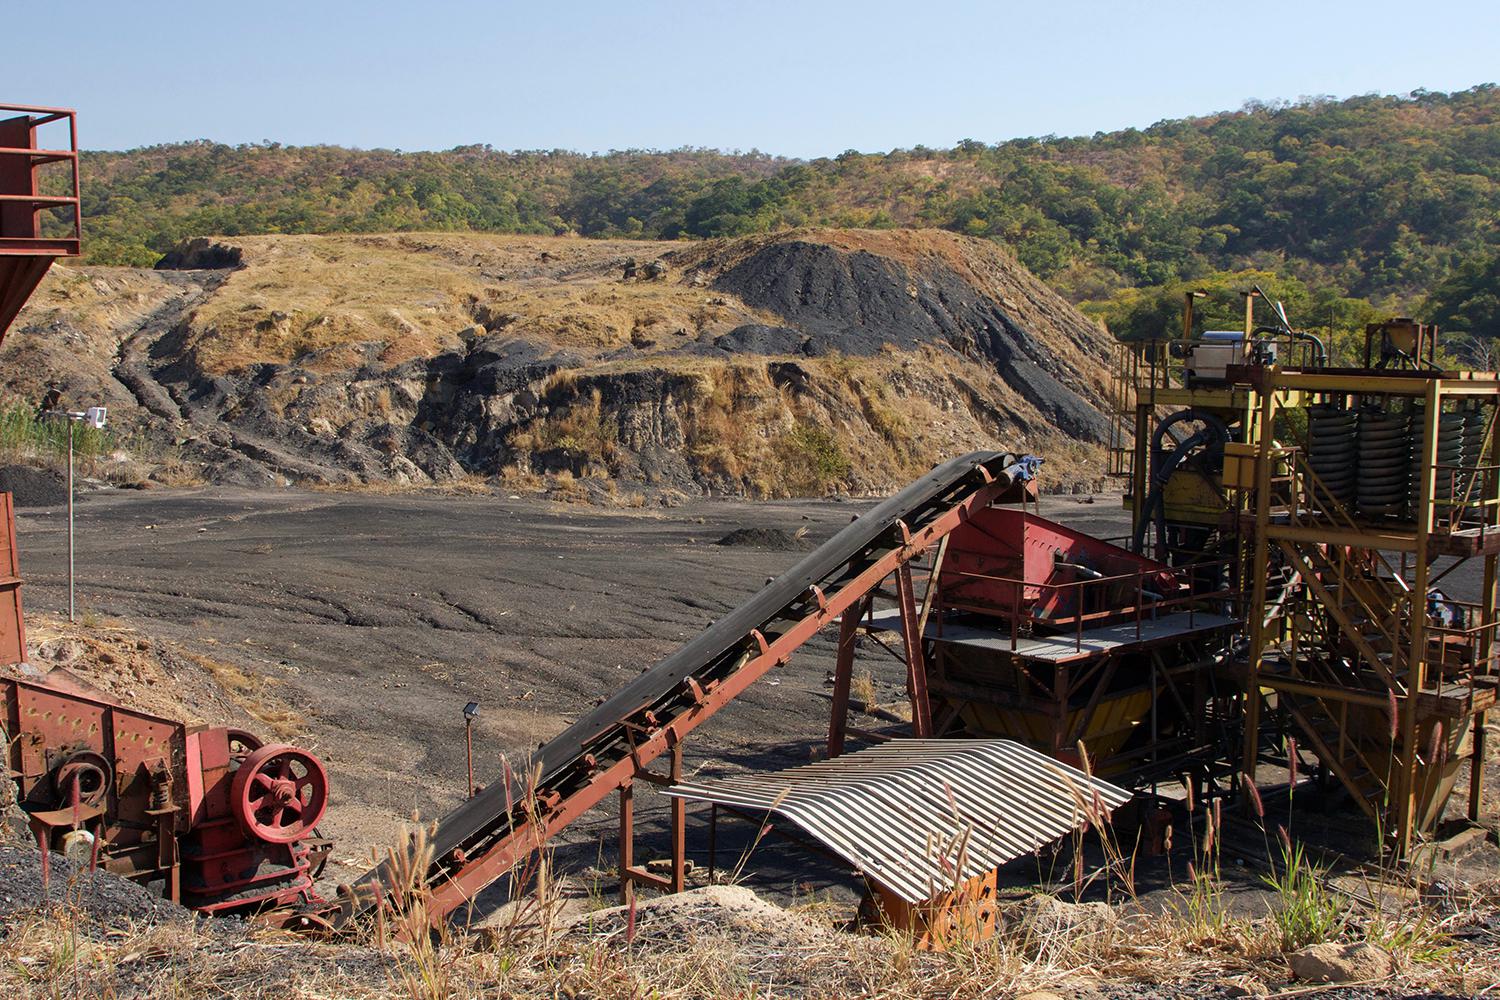 Mining machinery left behind at Eland coal mine at Mwabulambo after closure in 2015. Locals said that before the mine was closed, they were not informed about the closure or how the company intended to mitigate risks stemming from the abandoned mining site.